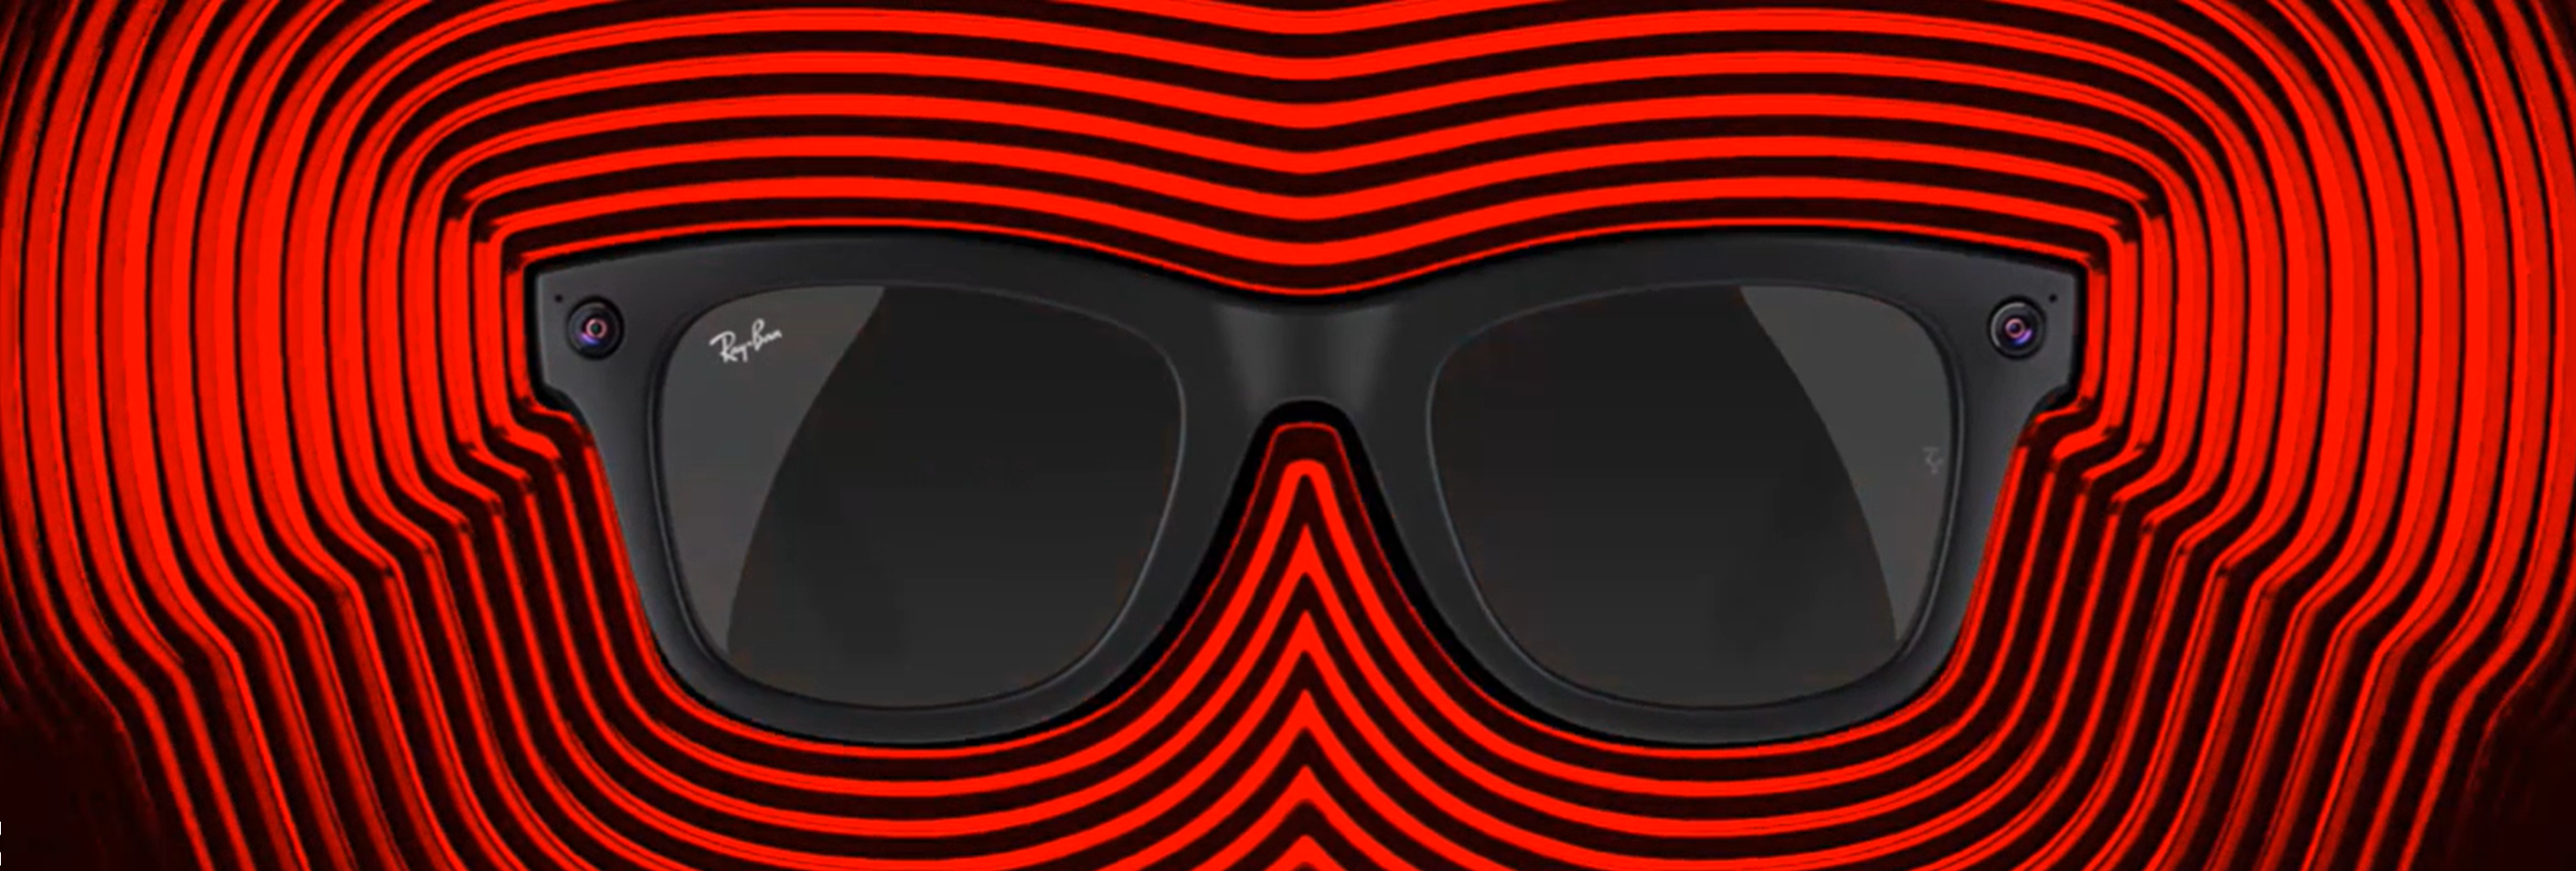 Ray-Ban Stories: Are Facebook and Ray-Ban's smart glasses a privacy  nightmare? | tbtech